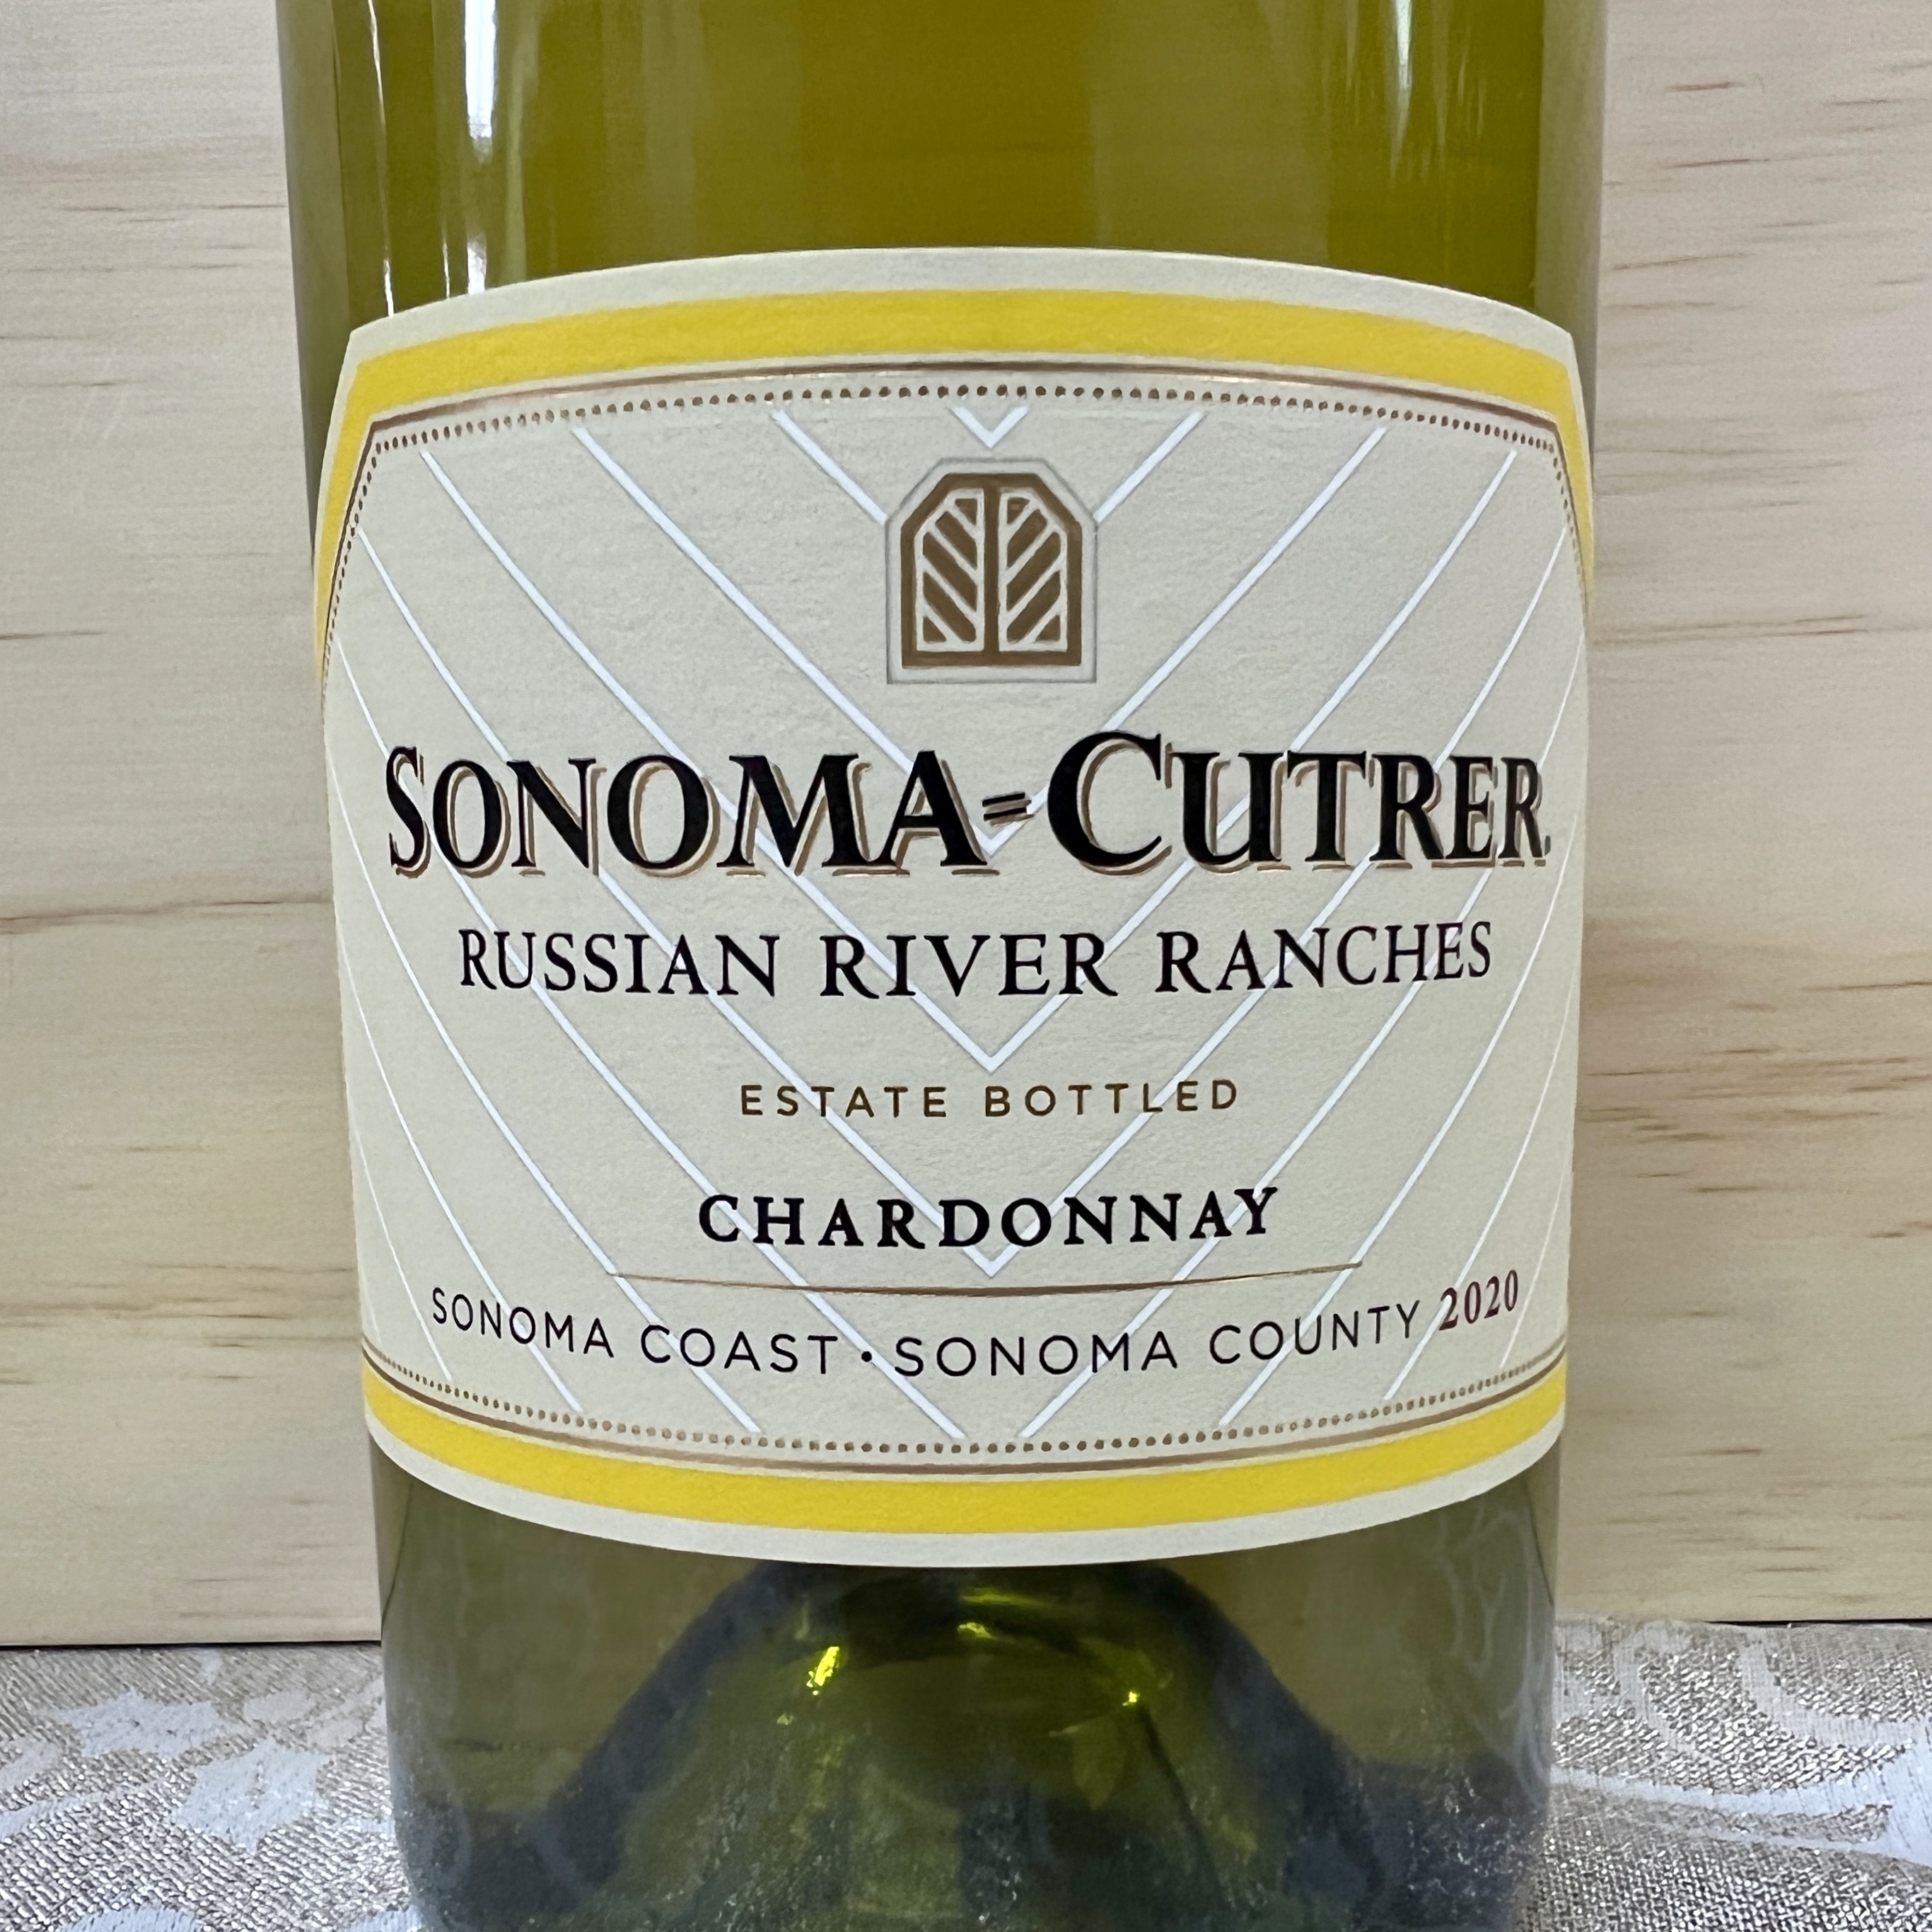 Sonoma Cutrer Russian River Ranches Chardonnay 2020